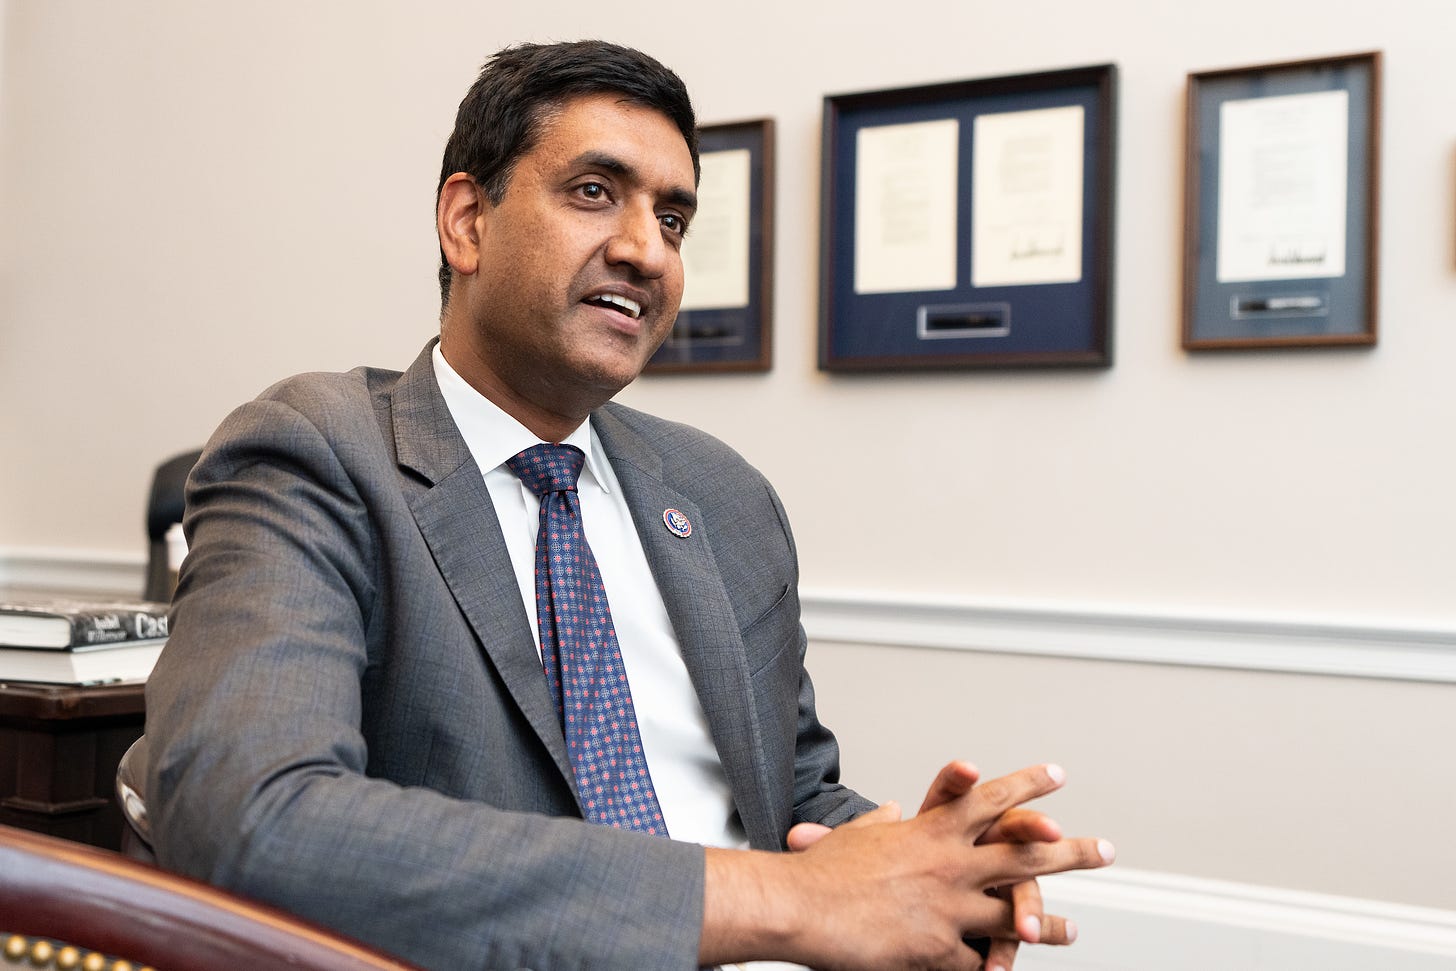 Not a 'monster': Why Rep. Ro Khanna still goes on Fox News - Roll Call